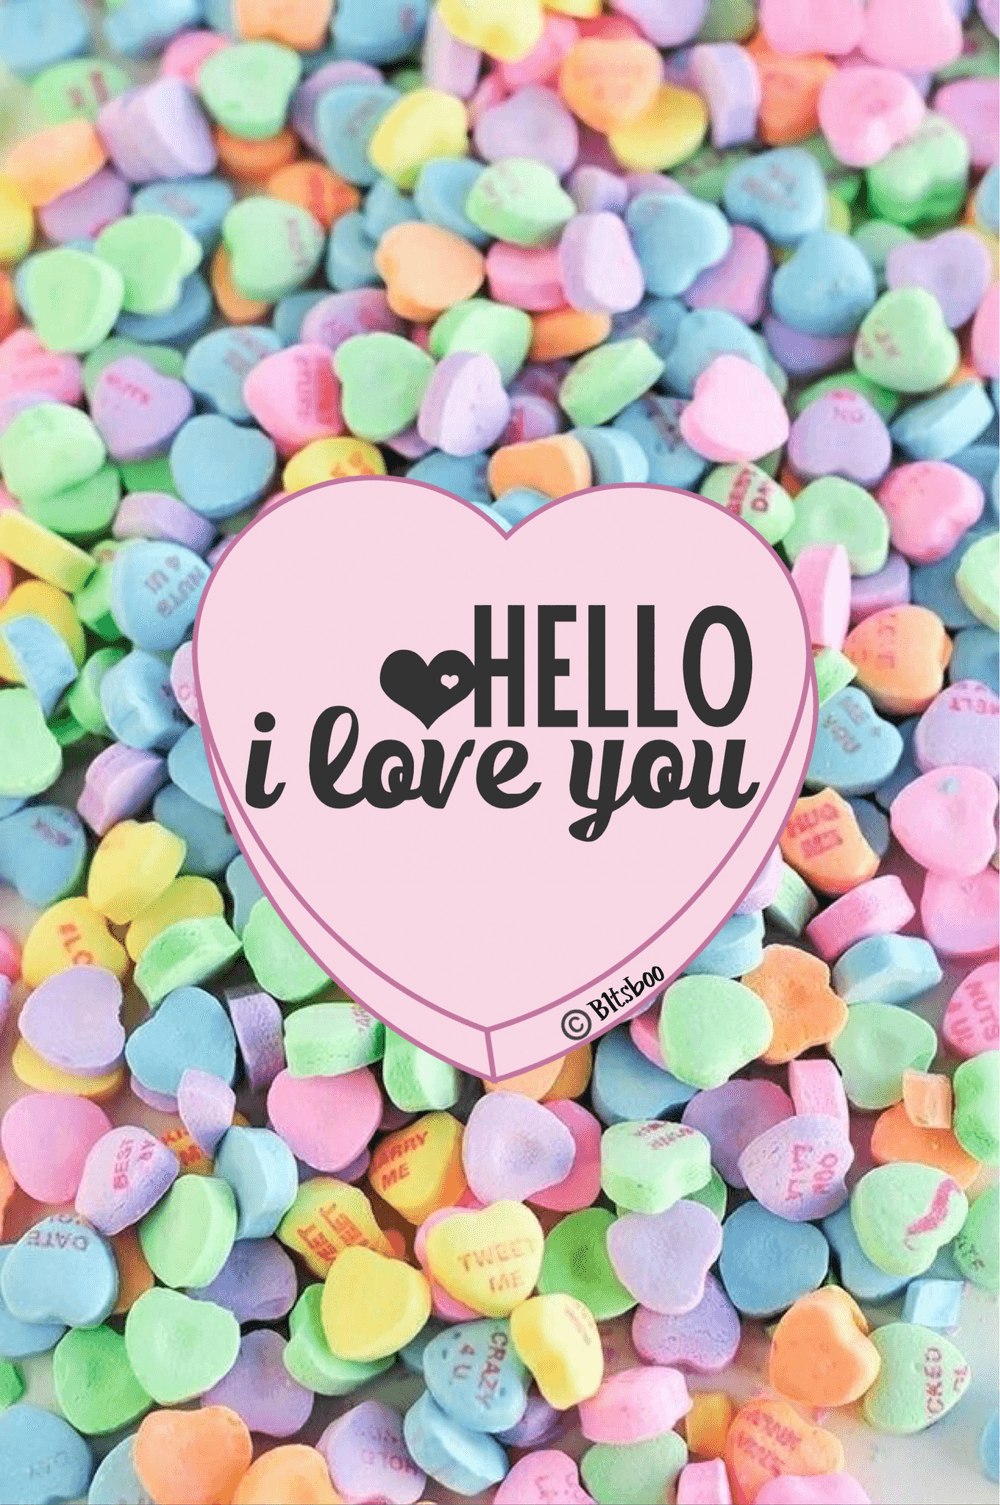 LSD Candy Heart Hello I Love You - LOVE SICK DEGENS Valentine's Collection  By: B1tsBoo | OpenSea